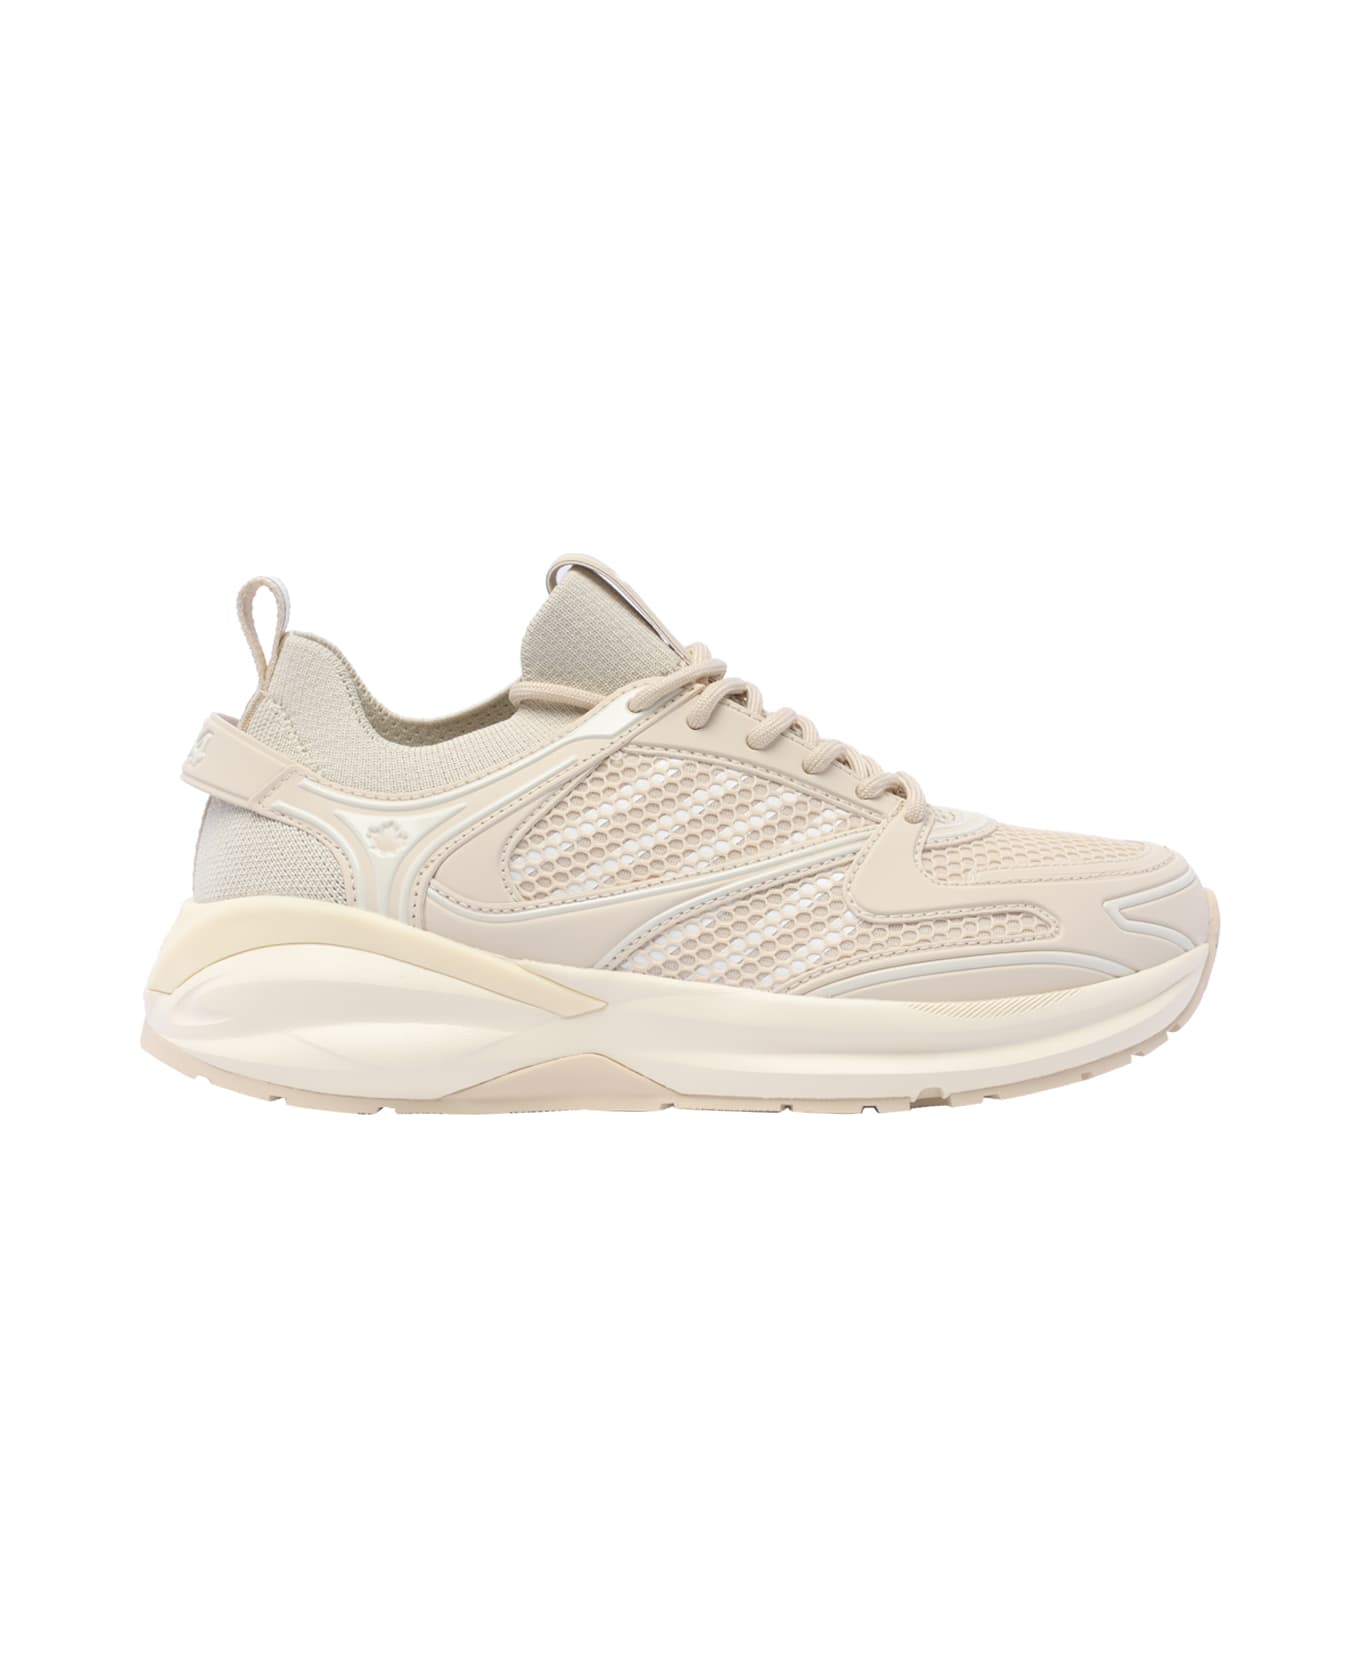 Dsquared2 Mesh Lace-up Sneakers - Beige